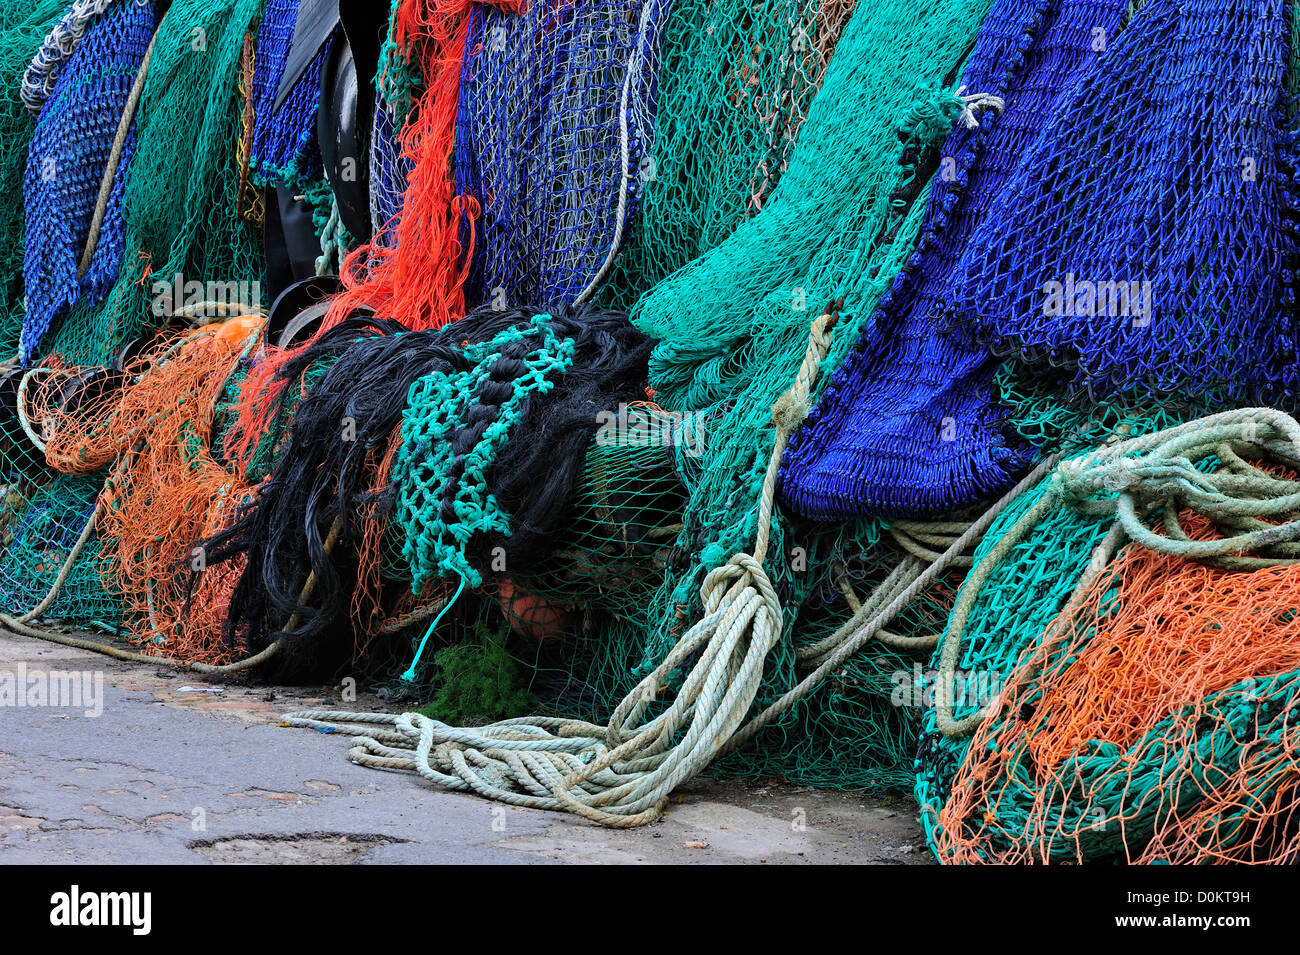 Colourful trawler fishing nets on the quay in Lyme Regis harbour along the Jurassic Coast, Dorset, southern England, UK Stock Photo